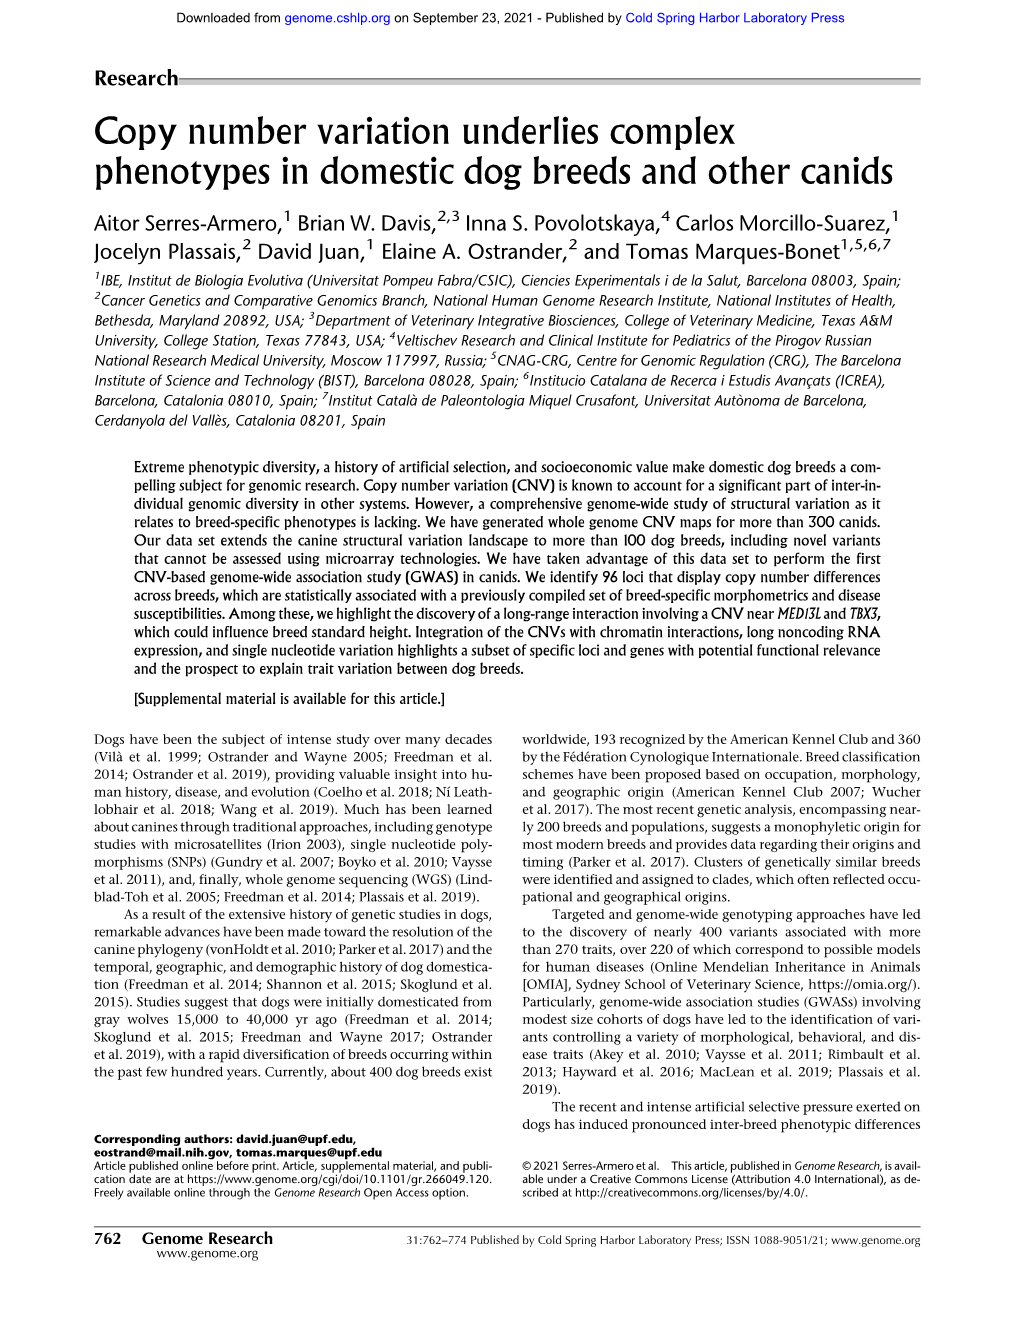 Copy Number Variation Underlies Complex Phenotypes in Domestic Dog Breeds and Other Canids